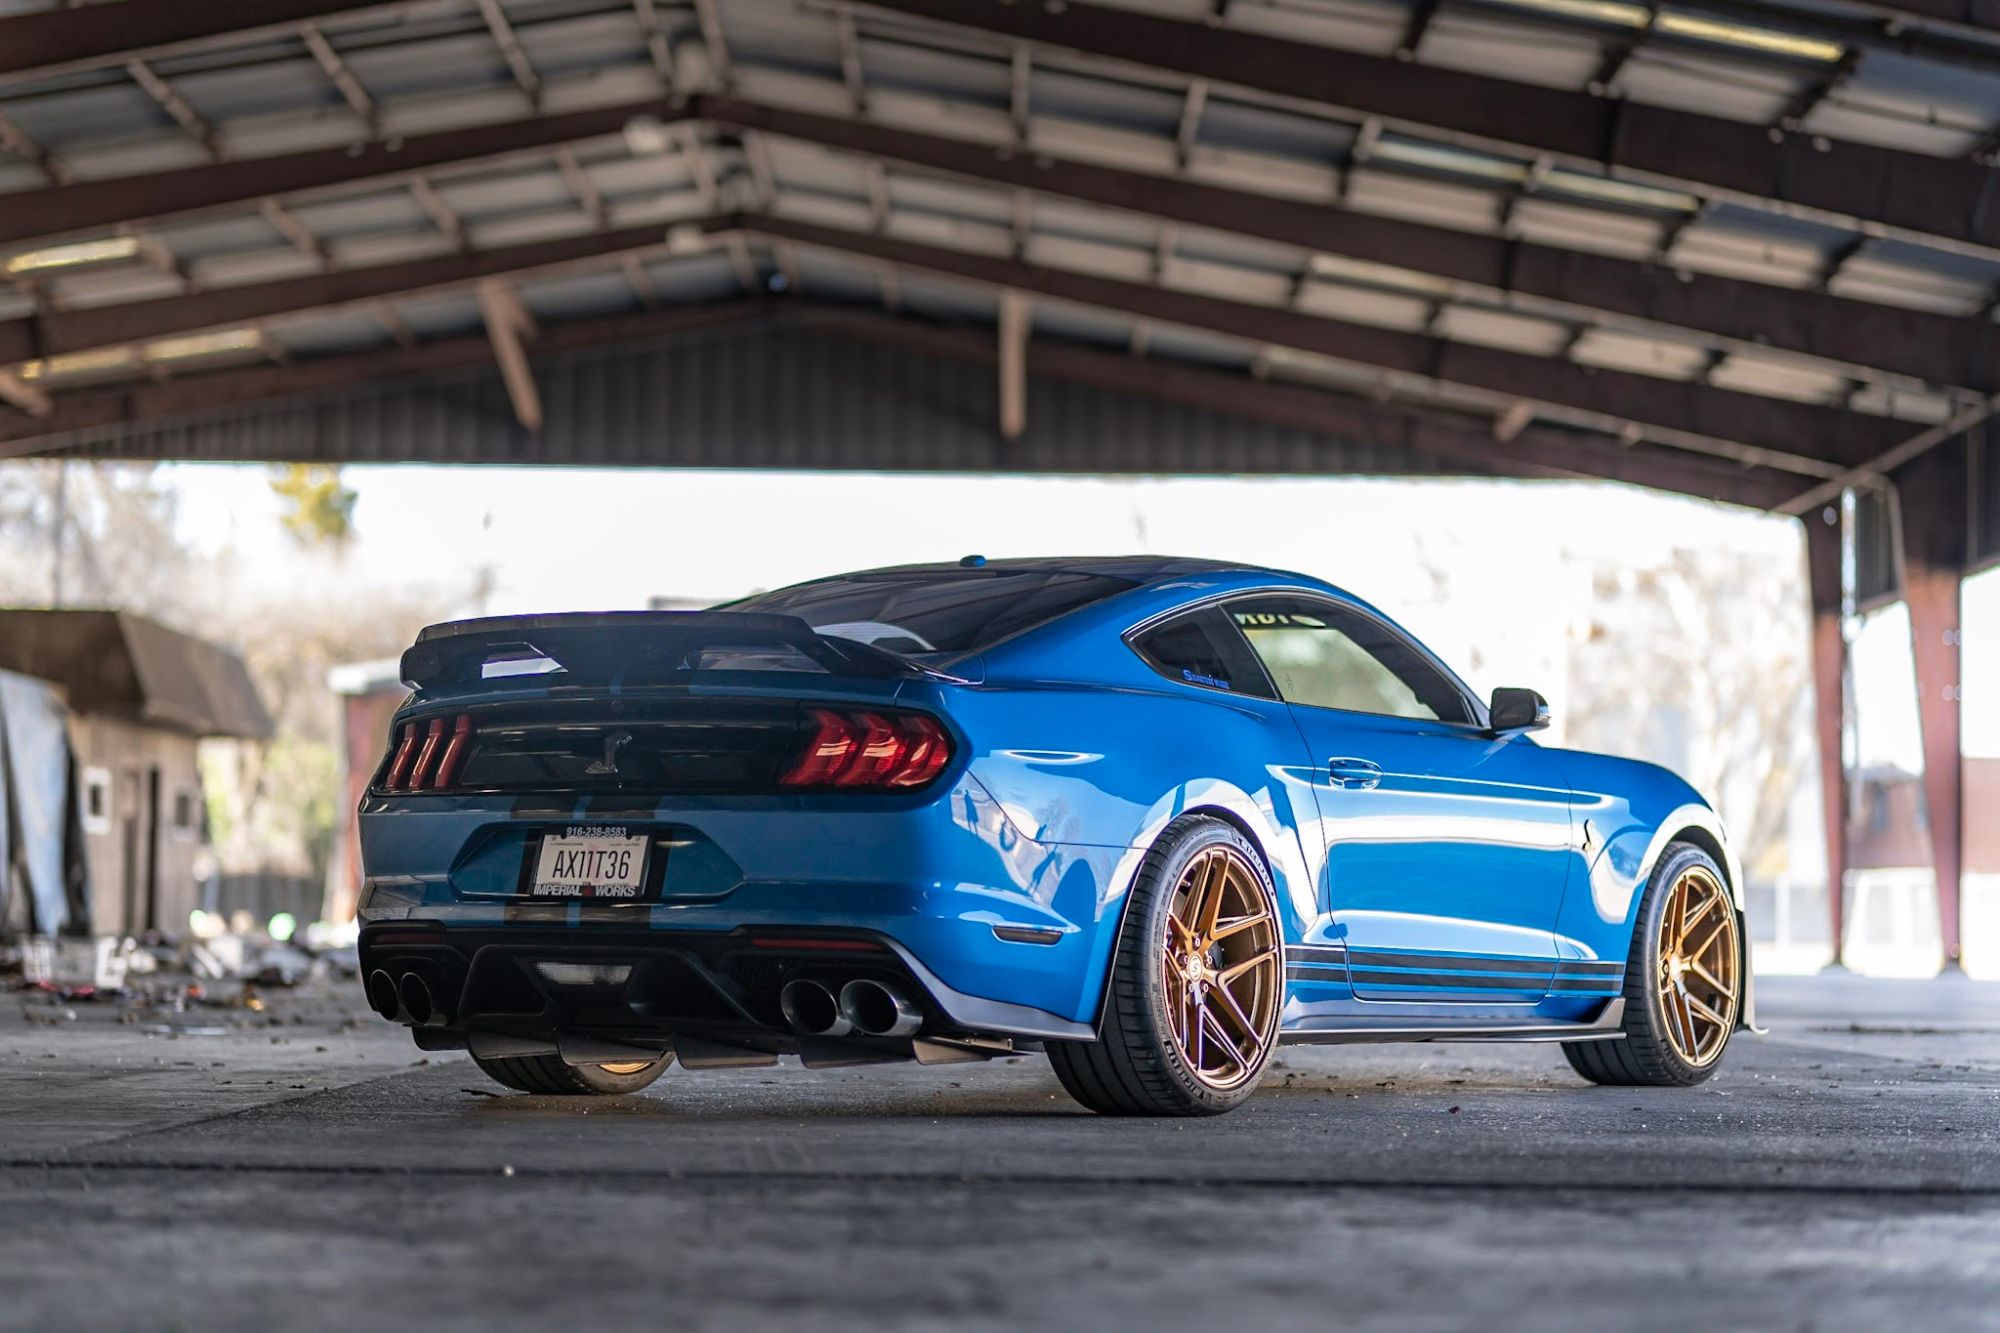 Wheel Front | Aftermarket & Custom Wheels Gallery - Shelby Mustang